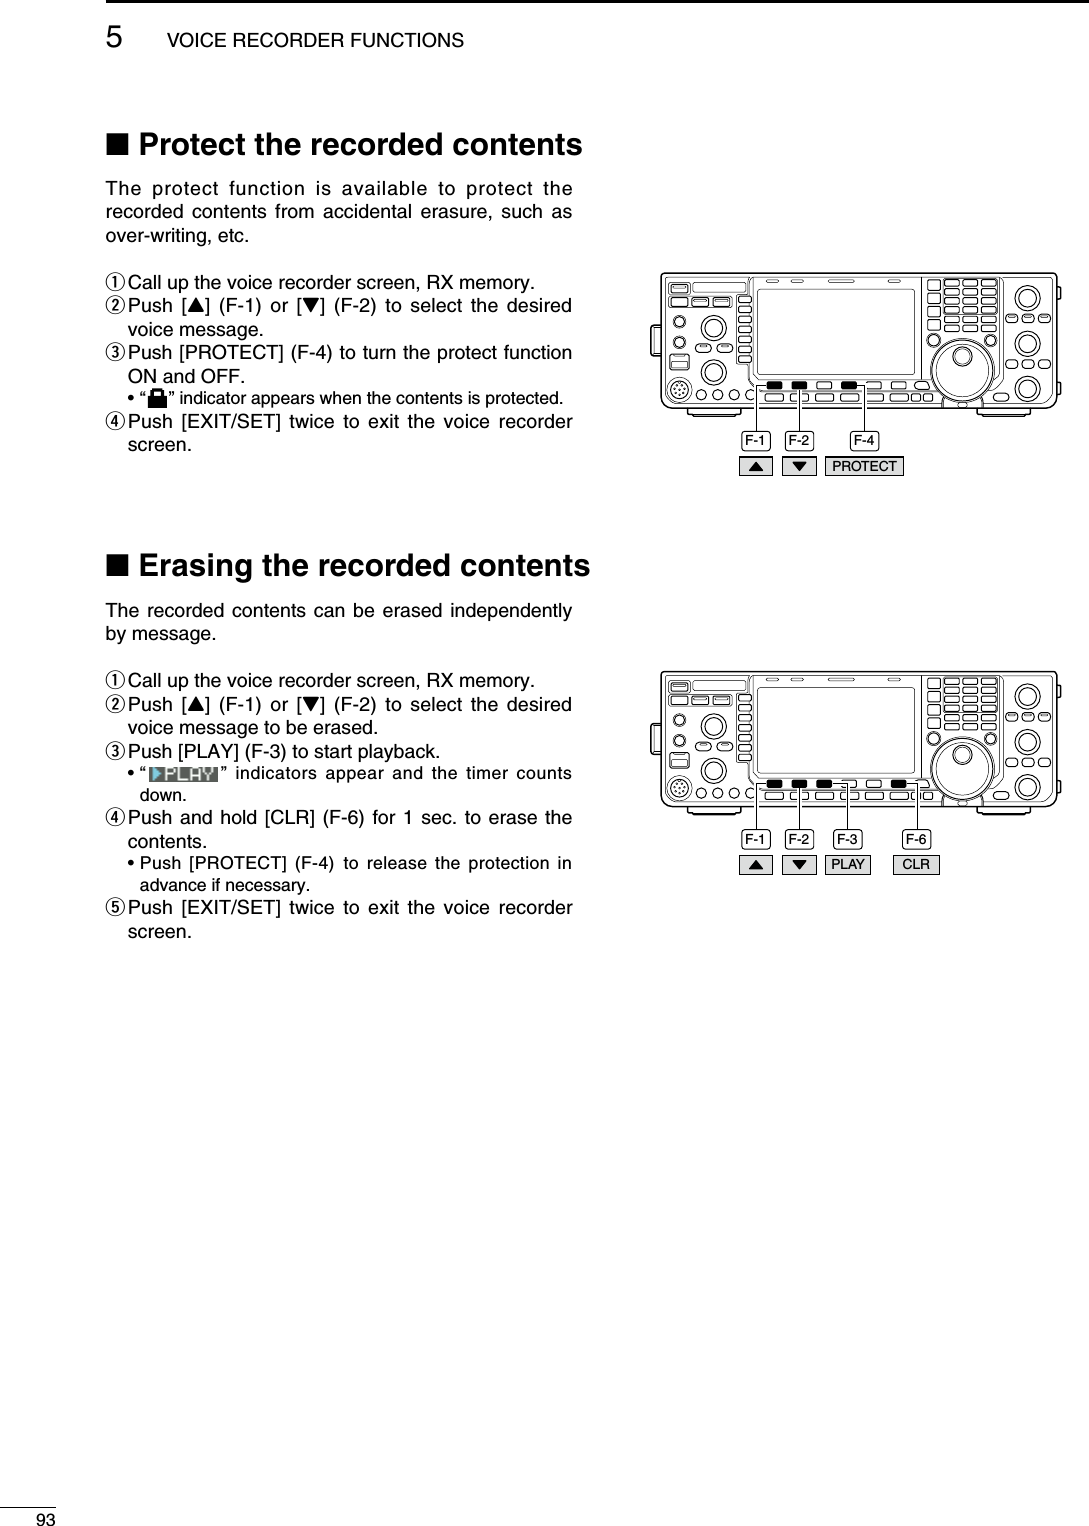 N Protect the recorded contentsThe protect function is available to protect the recorded contents from accidental erasure, such as over-writing, etc.q Call up the voice recorder screen, RX memory.w  Push [Y] (F-1) or [Z] (F-2) to select the desired voice message.e  Push [PROTECT] (F-4) to turn the protect function ON and OFF. • “   ” indicator appears when the contents is protected.r  Push [EXIT/SET] twice to exit the voice recorder screen. F-2 F-4F-1PROTECTN Erasing the recorded contentsThe recorded contents can be erased independently by message.q Call up the voice recorder screen, RX memory.w  Push [Y] (F-1) or [Z] (F-2) to select the desired voice message to be erased.e  Push [PLAY] (F-3) to start playback. •  “   ” indicators appear and the timer counts down.r  Push and hold [CLR] (F-6) for 1 sec. to erase the contents. •  Push [PROTECT] (F-4) to release the protection in advance if necessary.t  Push [EXIT/SET] twice to exit the voice recorder screen.F-2 F-3 F-6F-1PLAY CLR935VOICE RECORDER FUNCTIONS